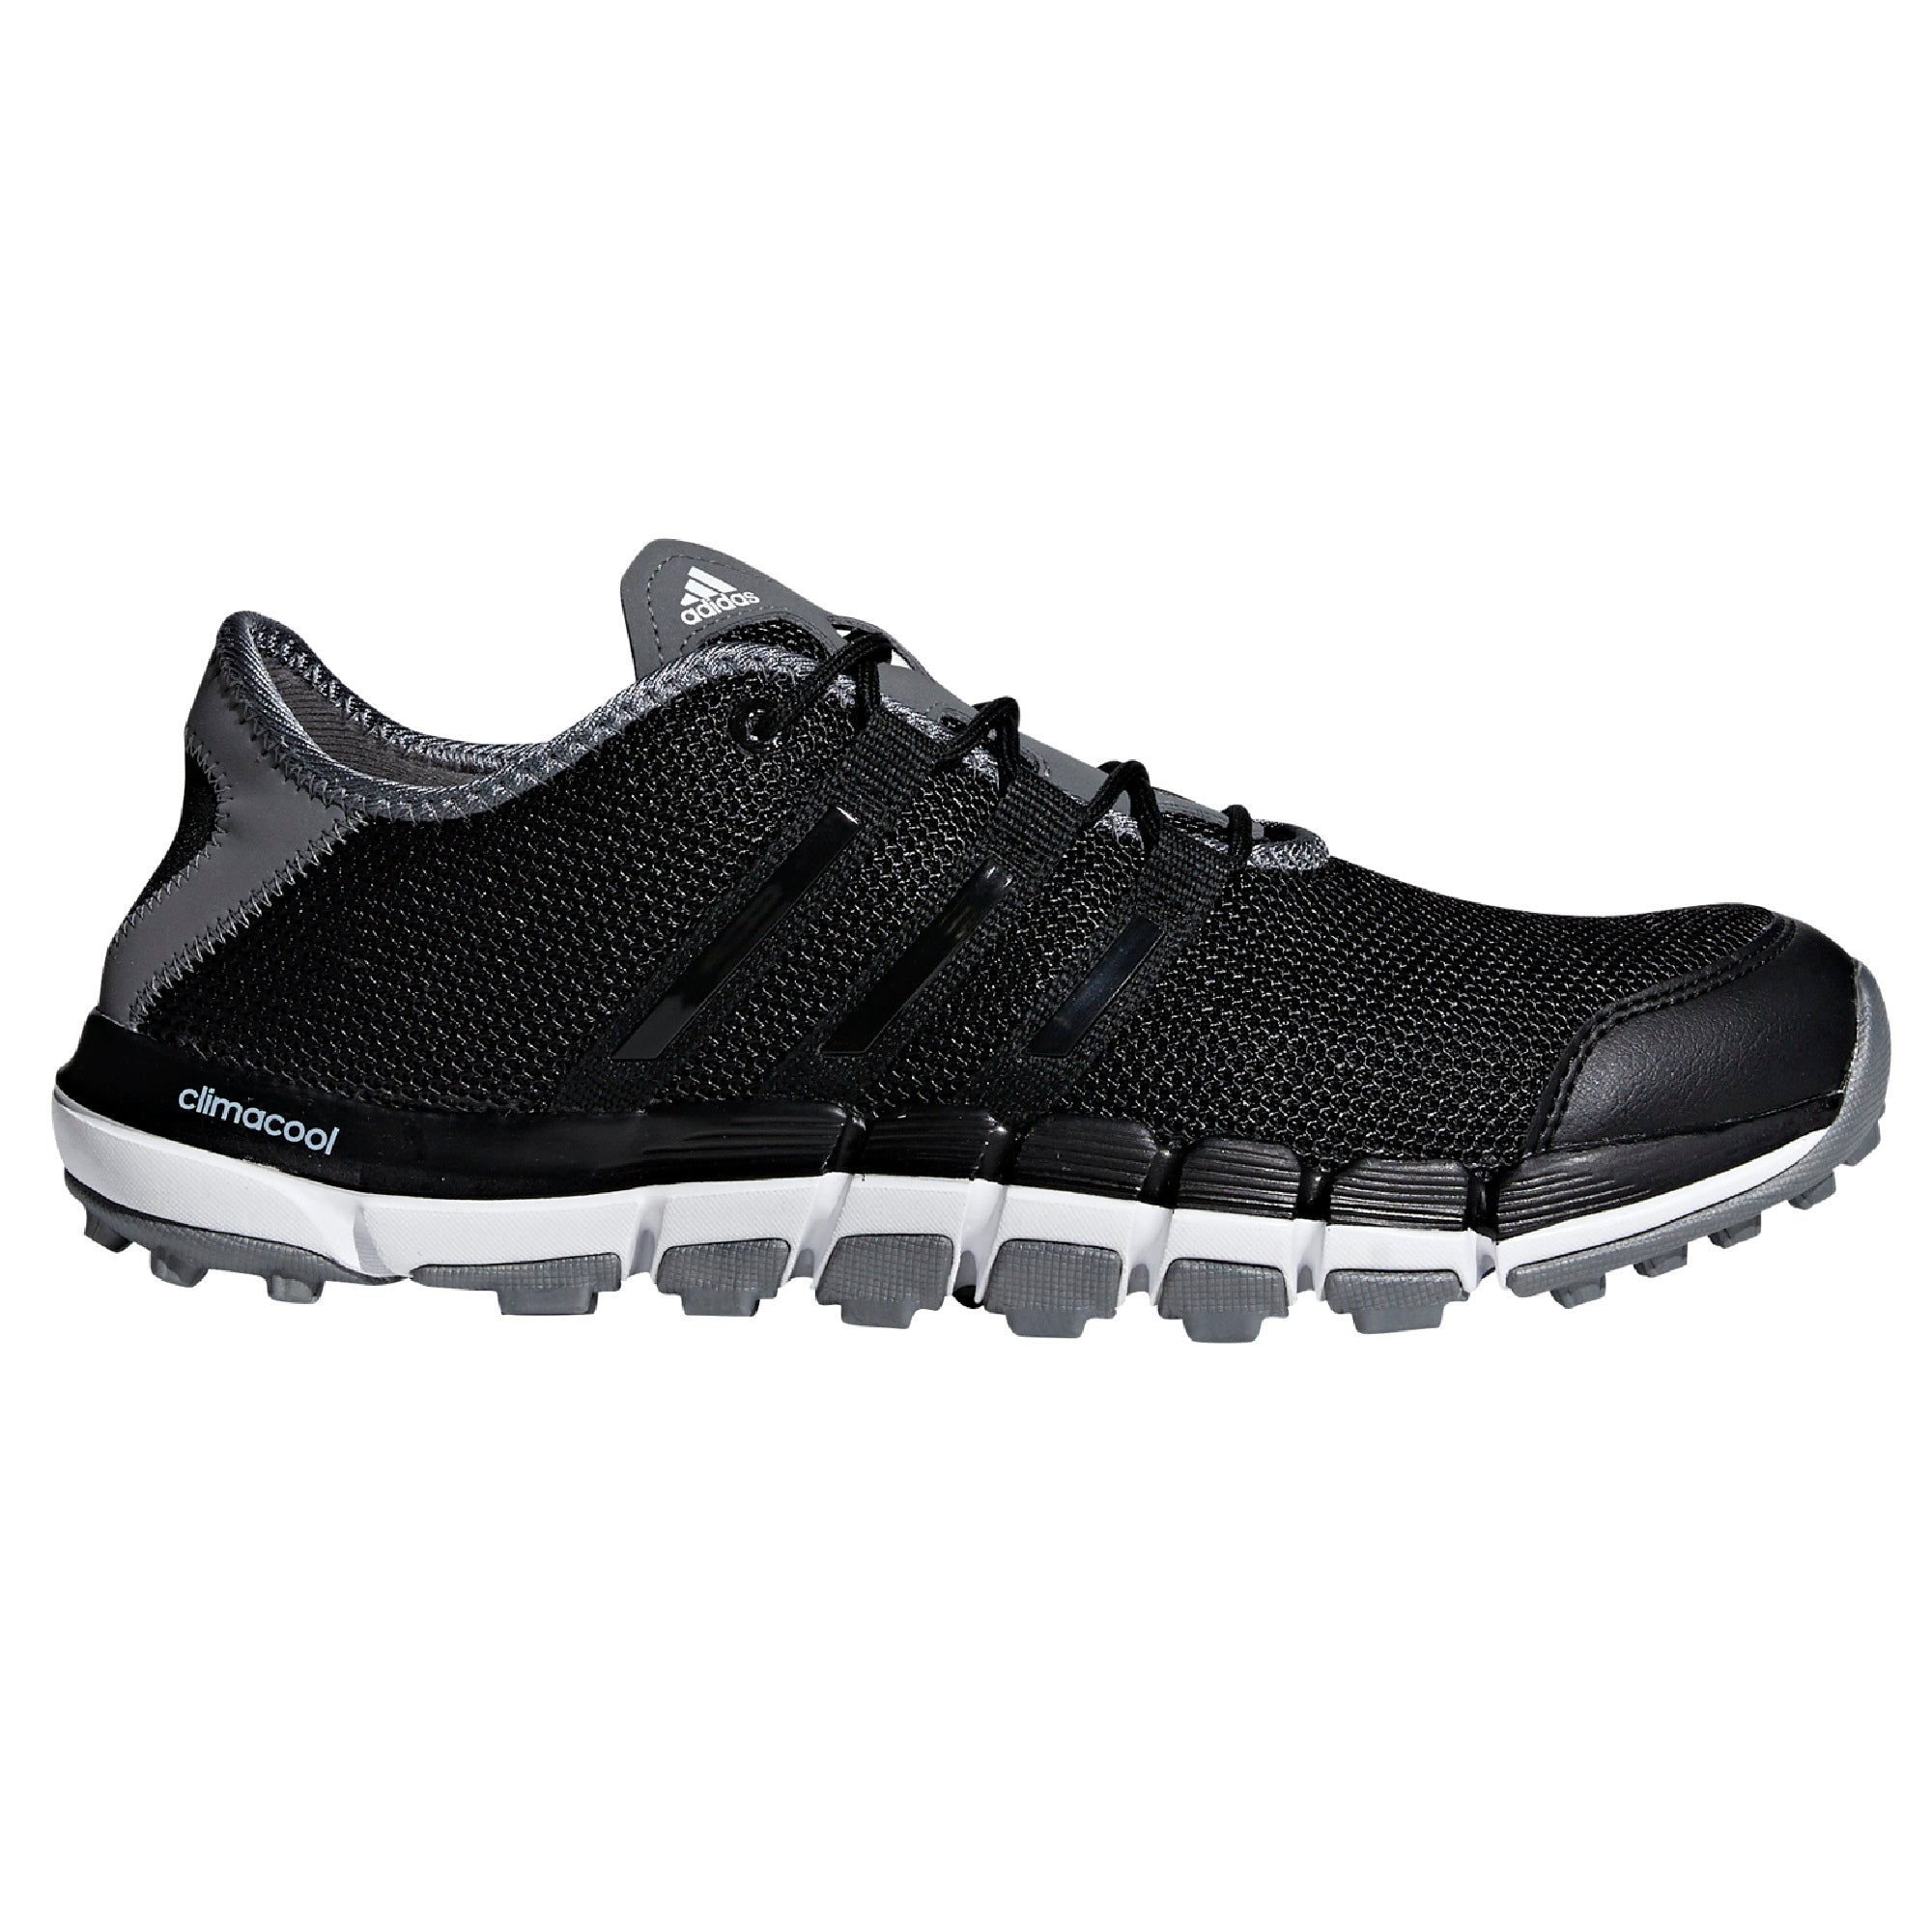 adidas ClimaCool ST Golf Shoes F33526 